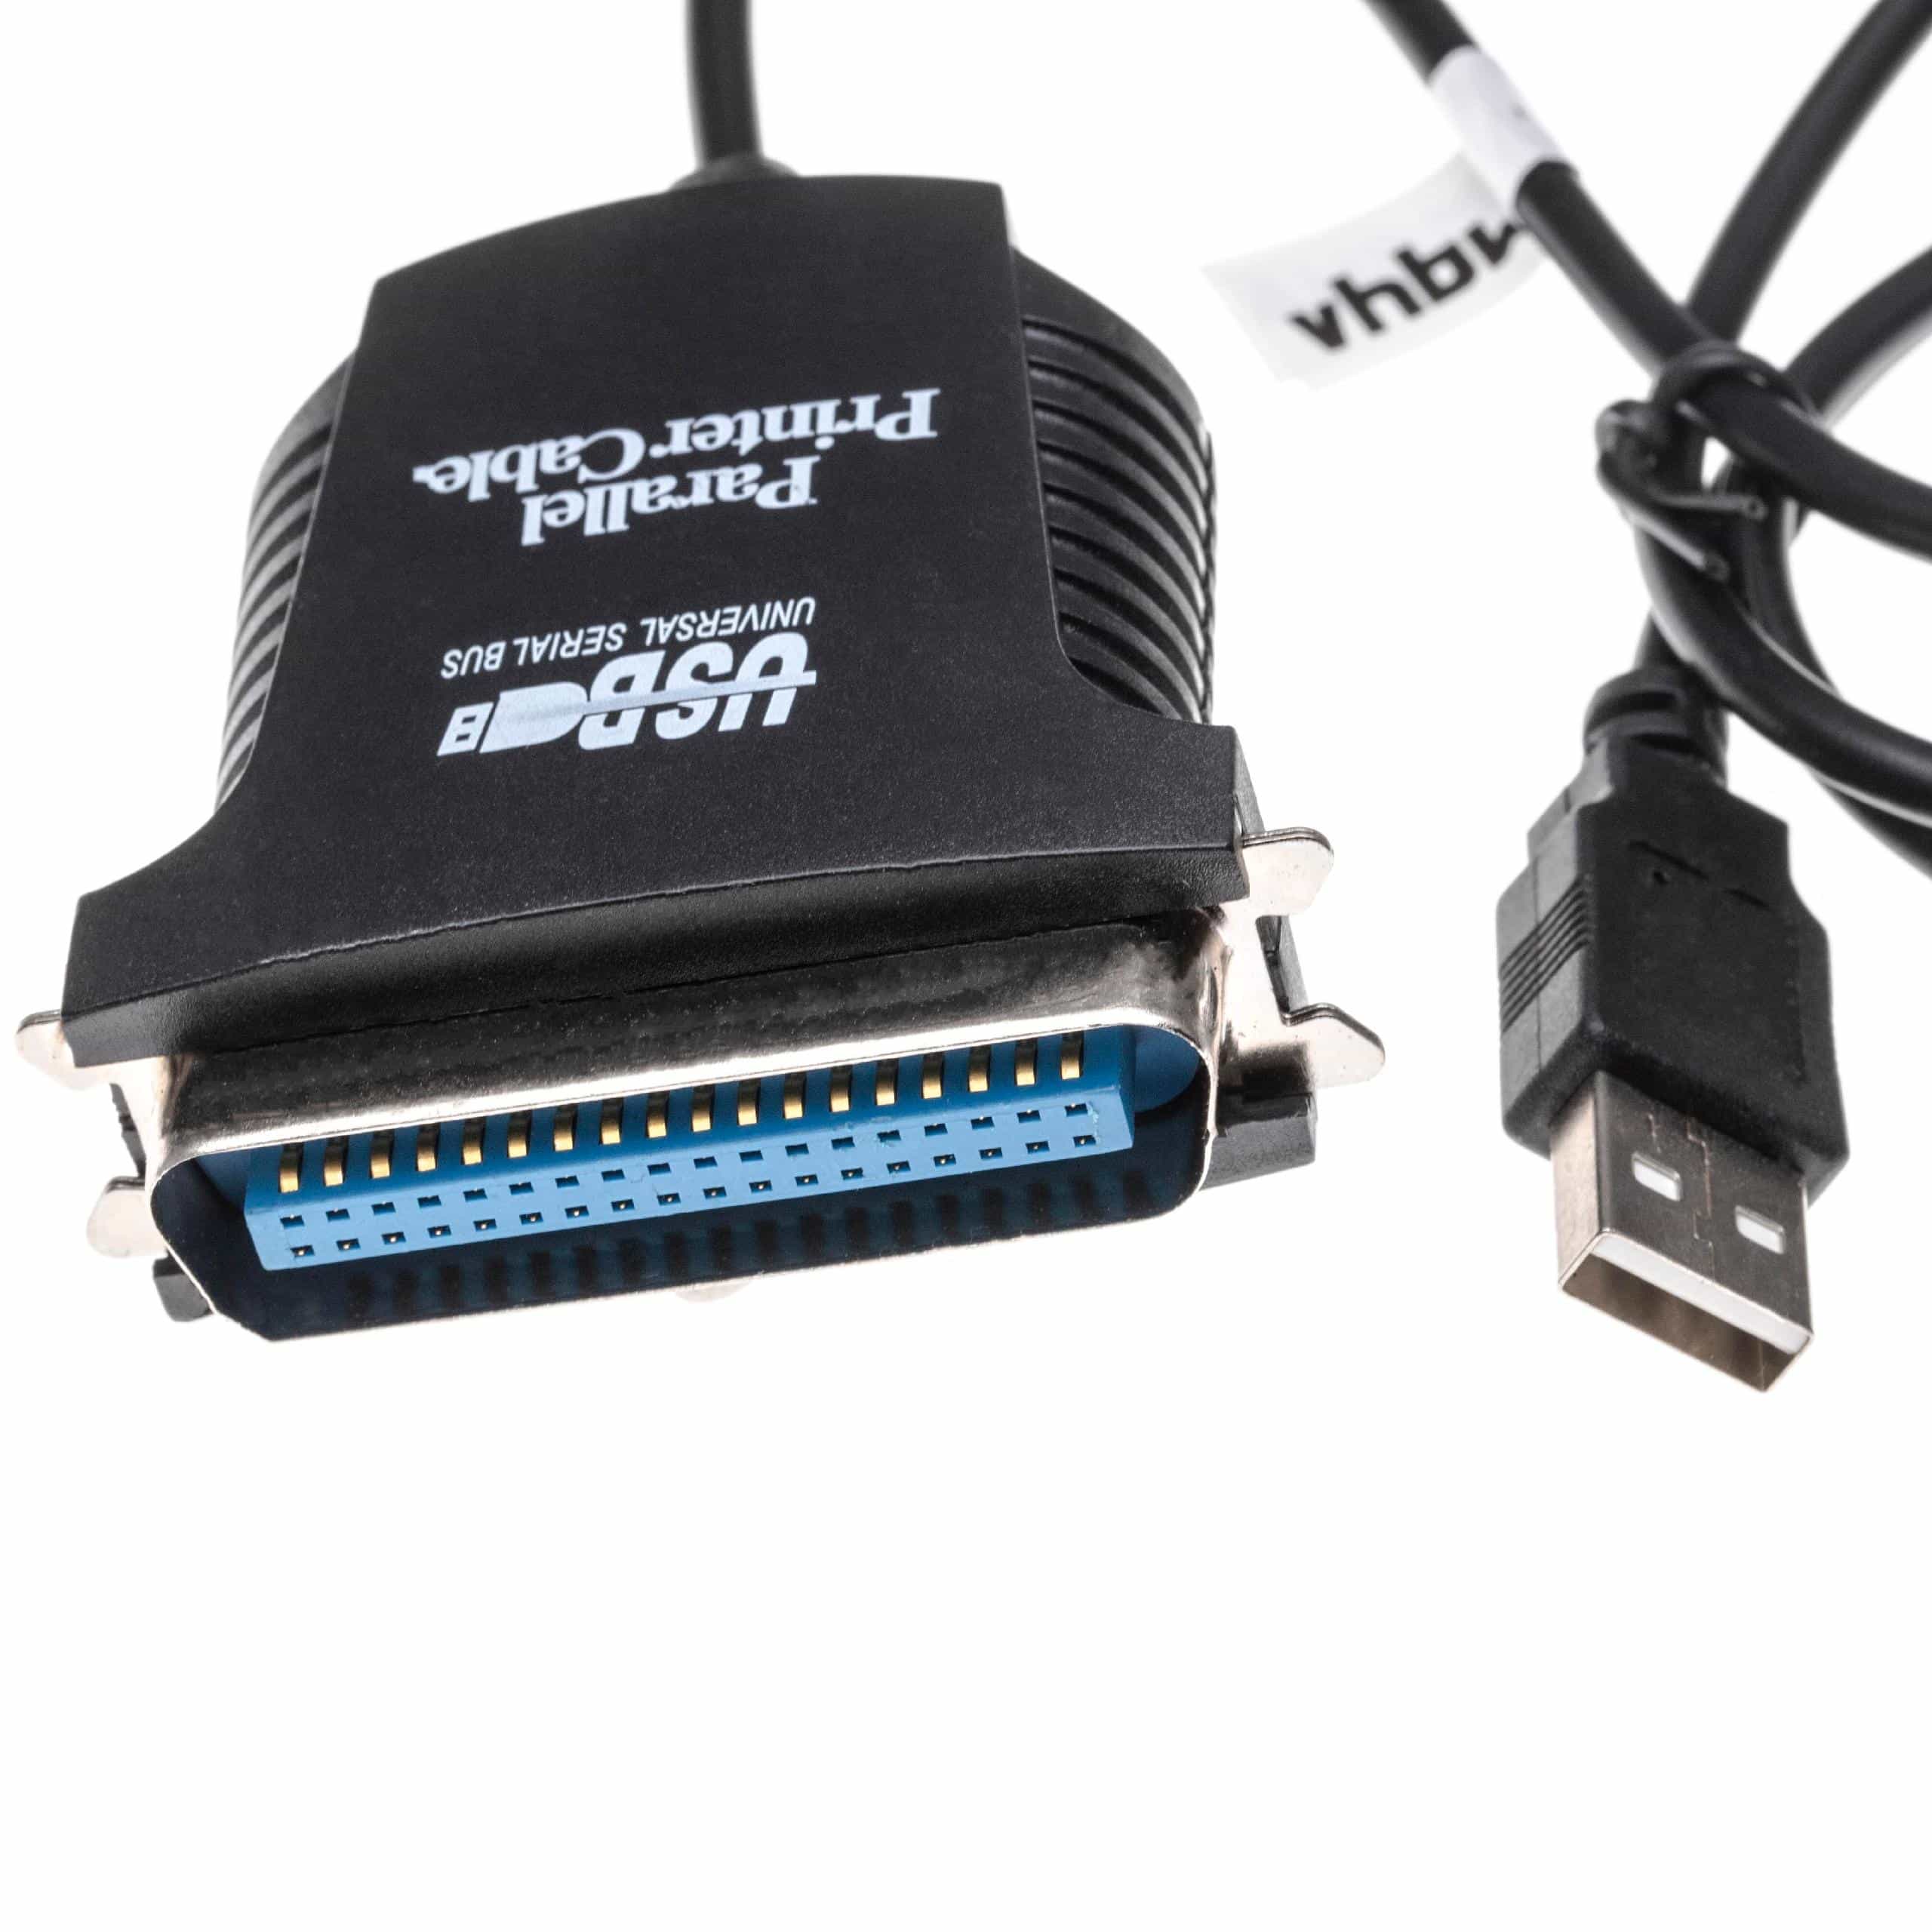 USB A to 36 pin connector Adapter Cable for Printer, Scanner, Fax Machine - USB Connection Cable